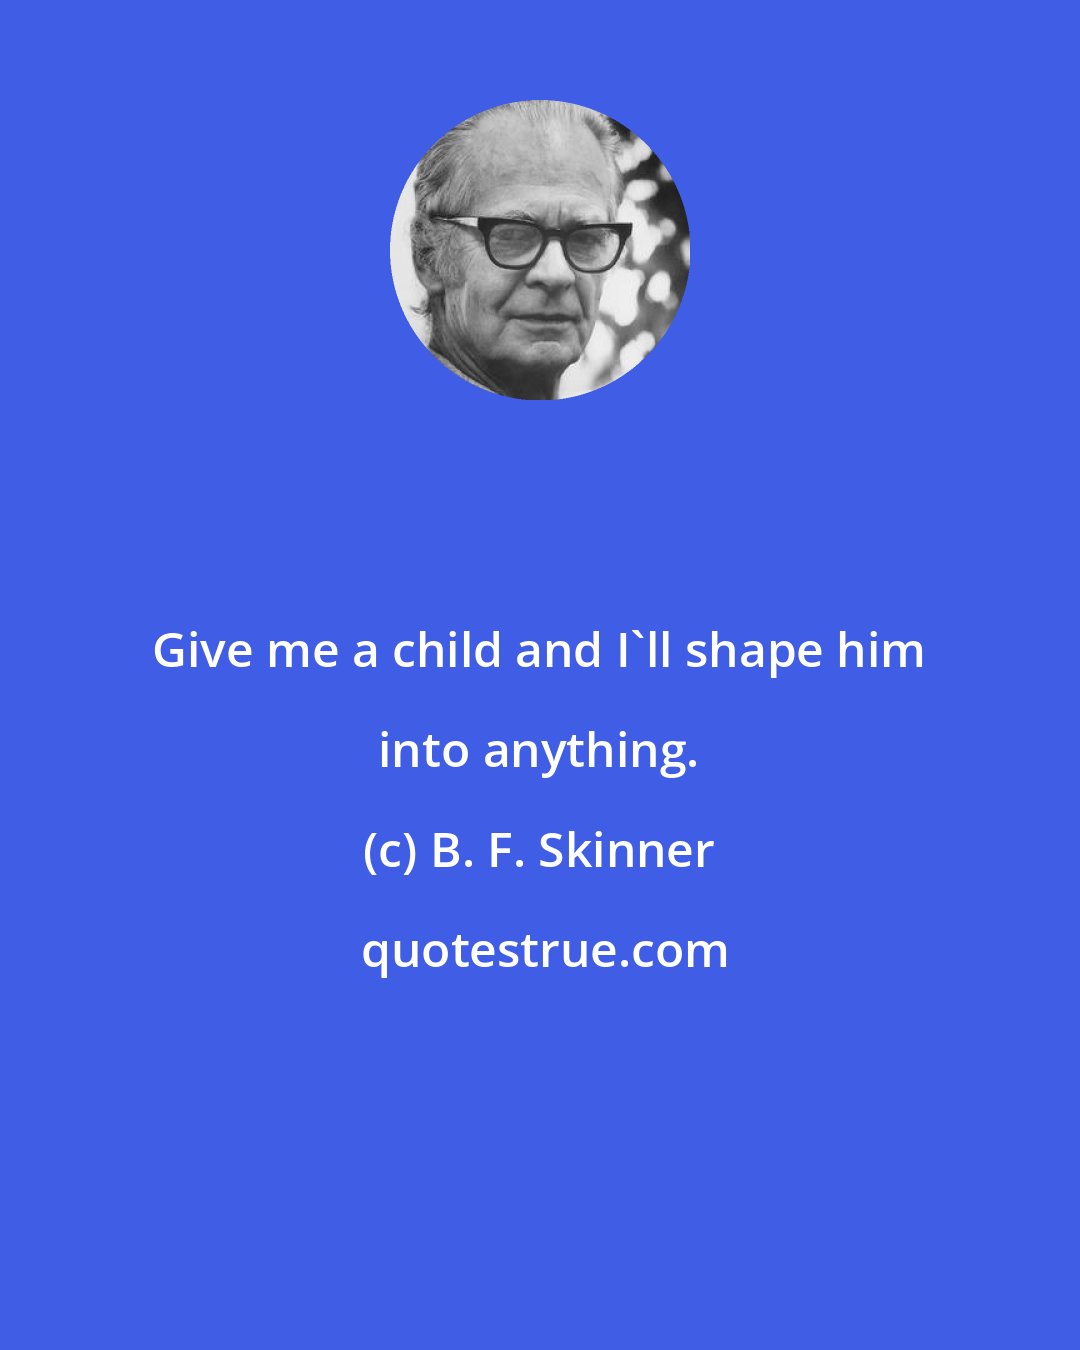 B. F. Skinner: Give me a child and I'll shape him into anything.